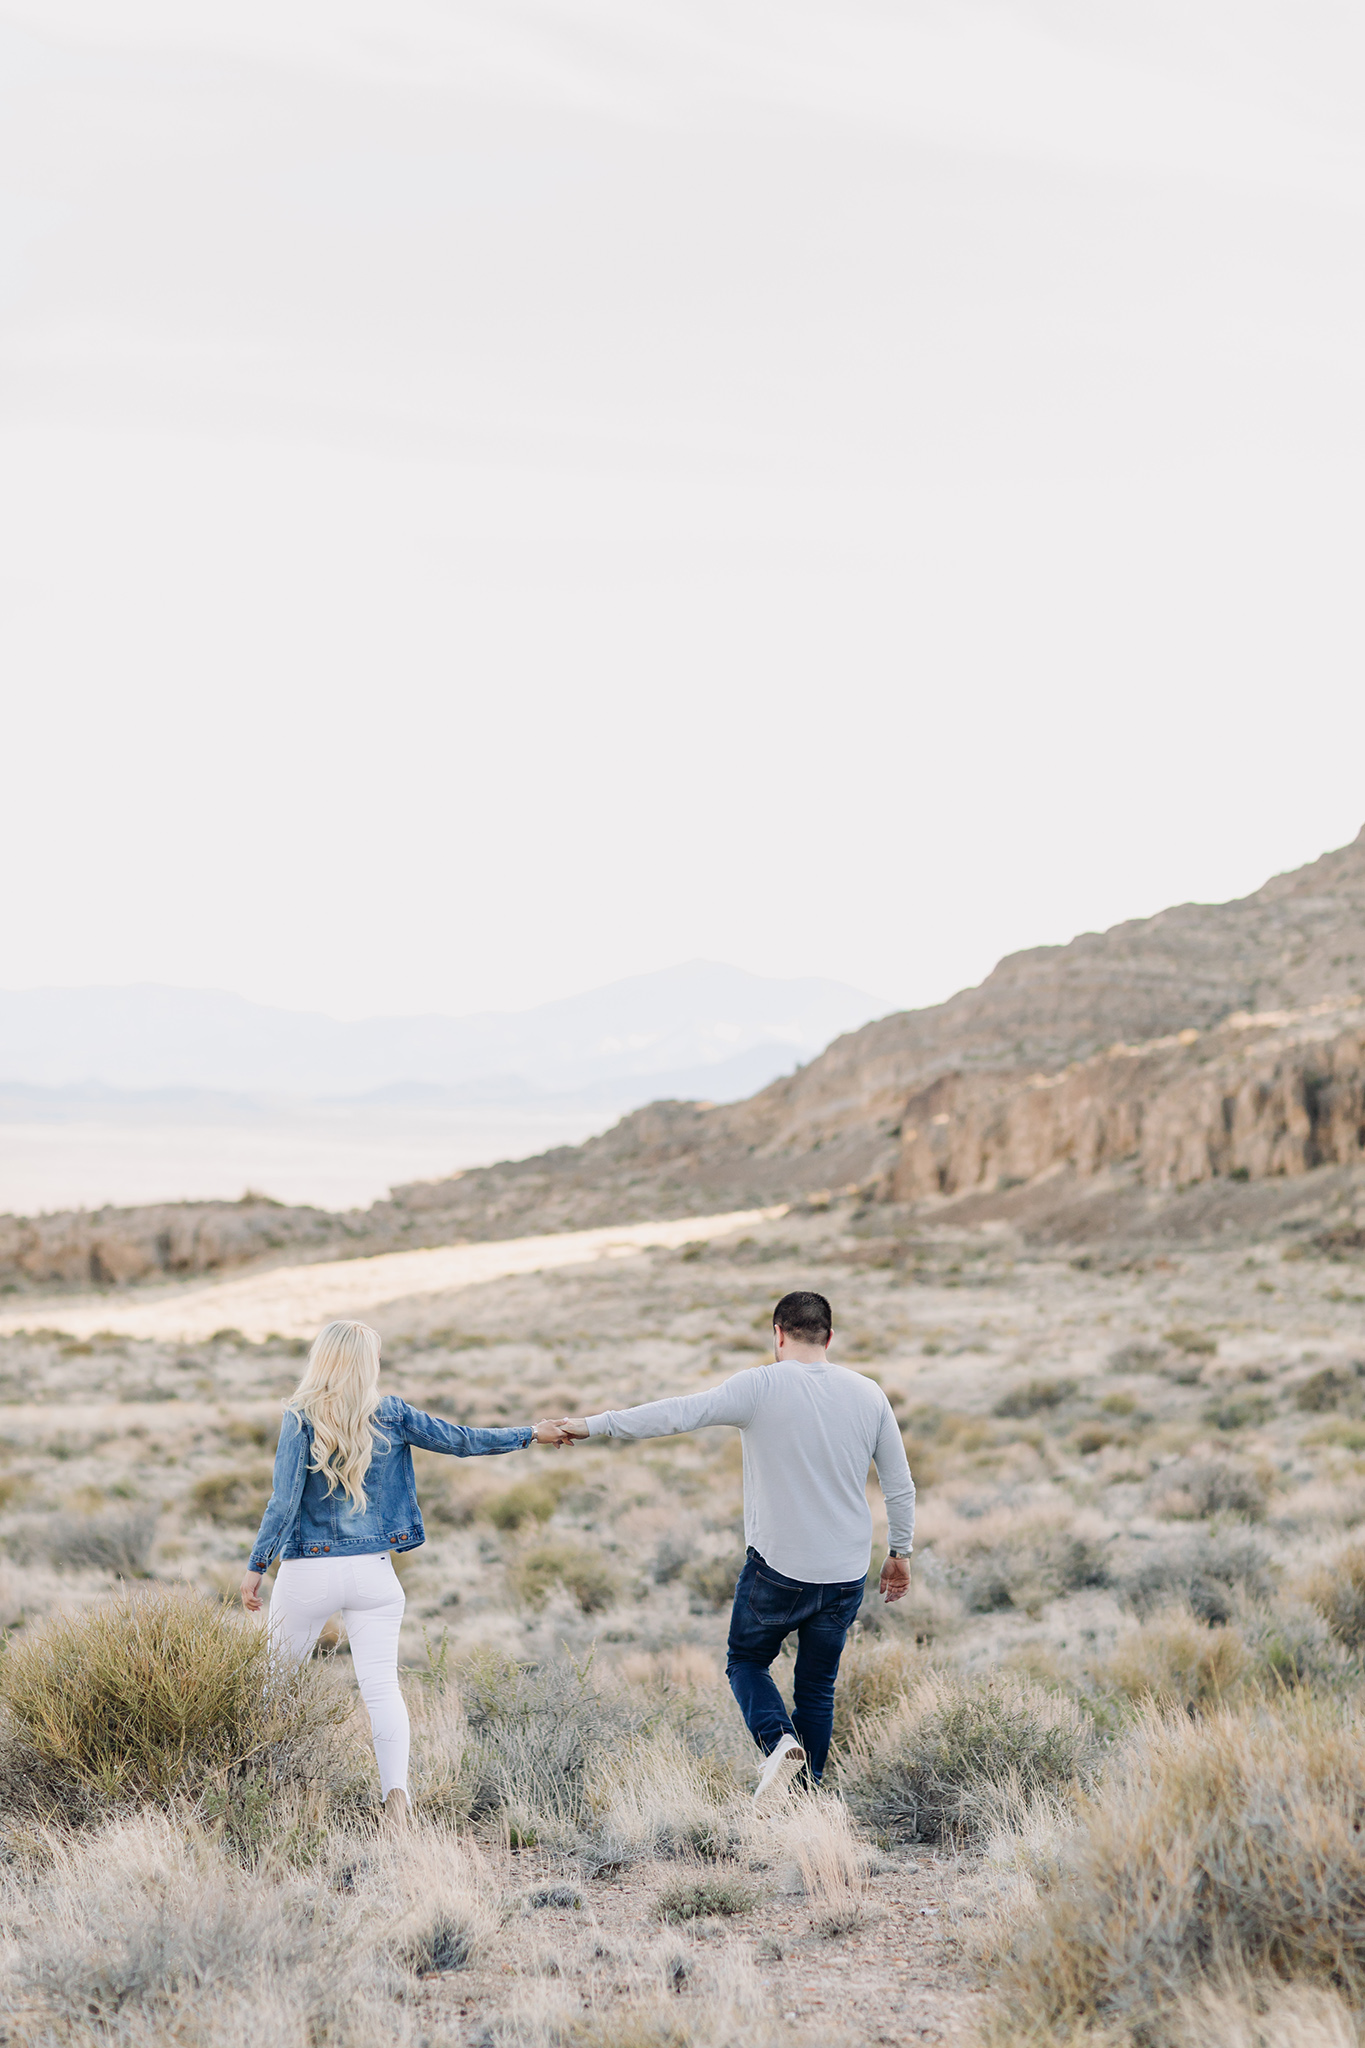 west wendover nevada desert couples photo shoot by ENV Photography in the spring